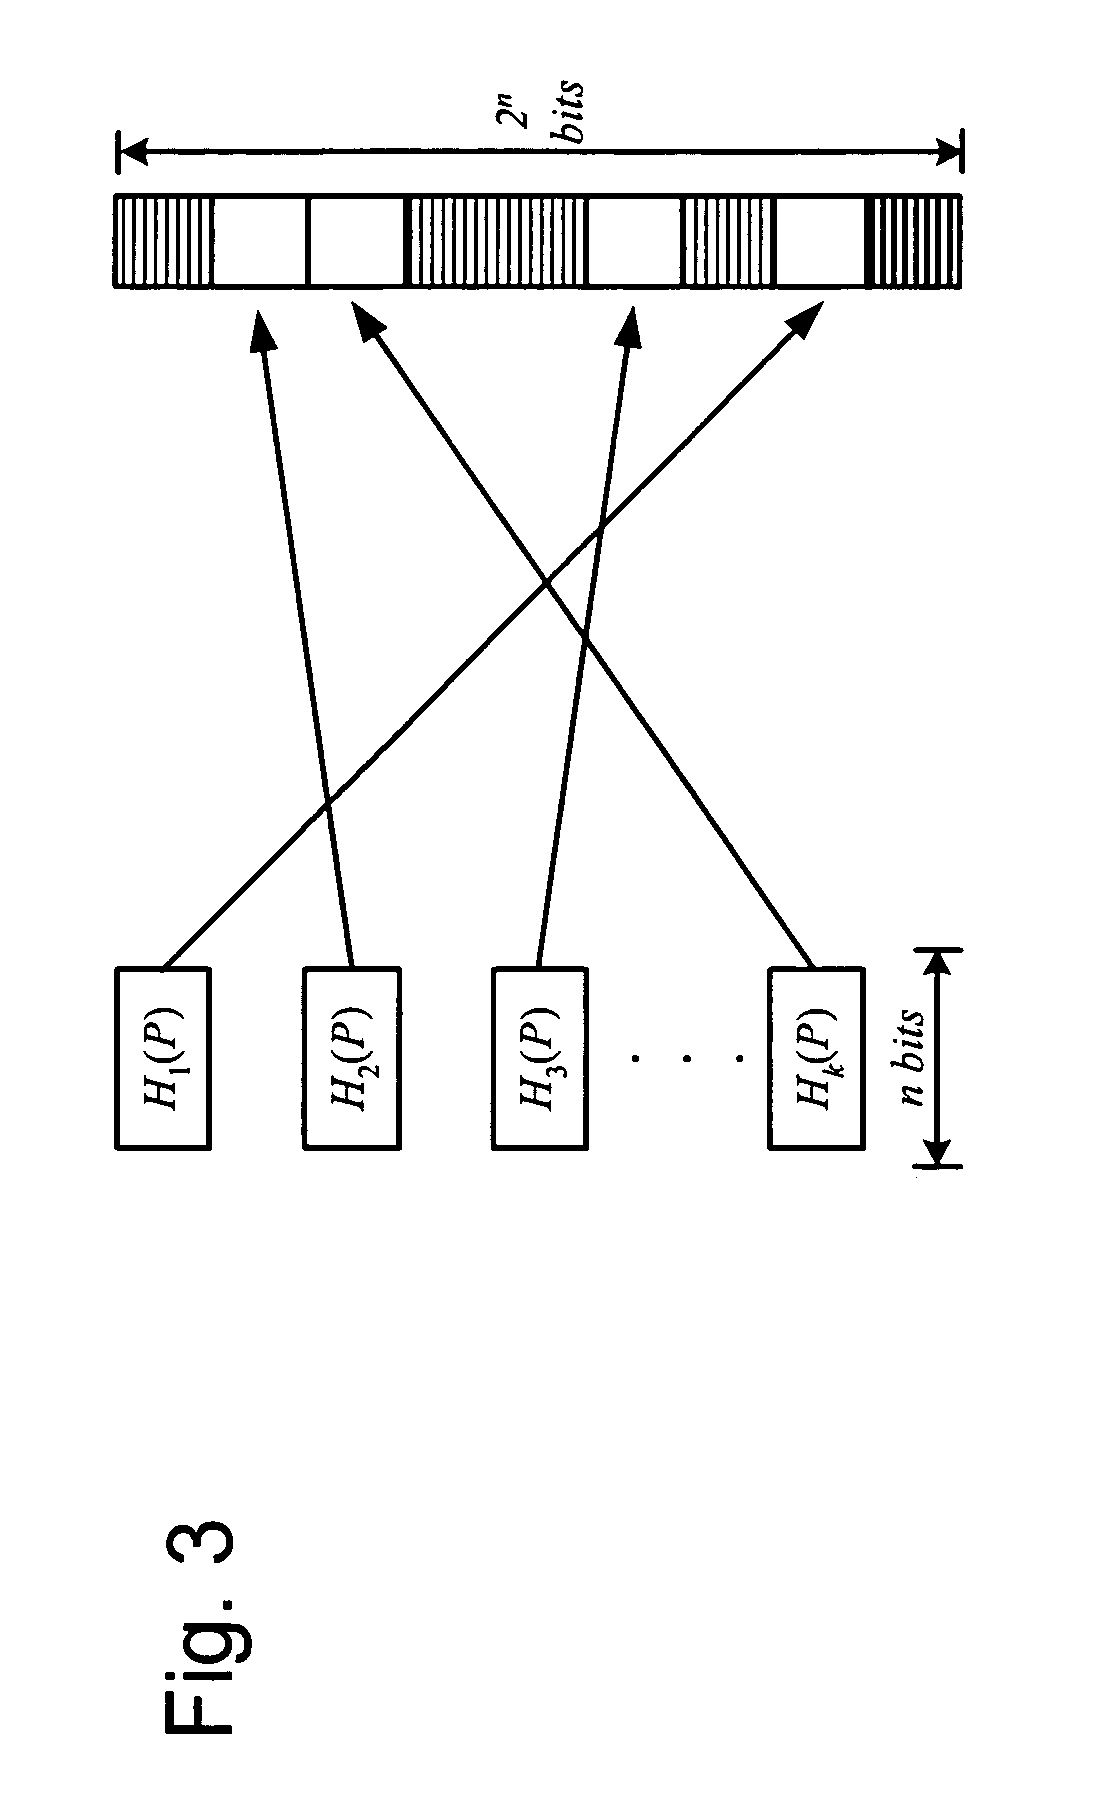 Method and system for integrated computer networking attack attribution